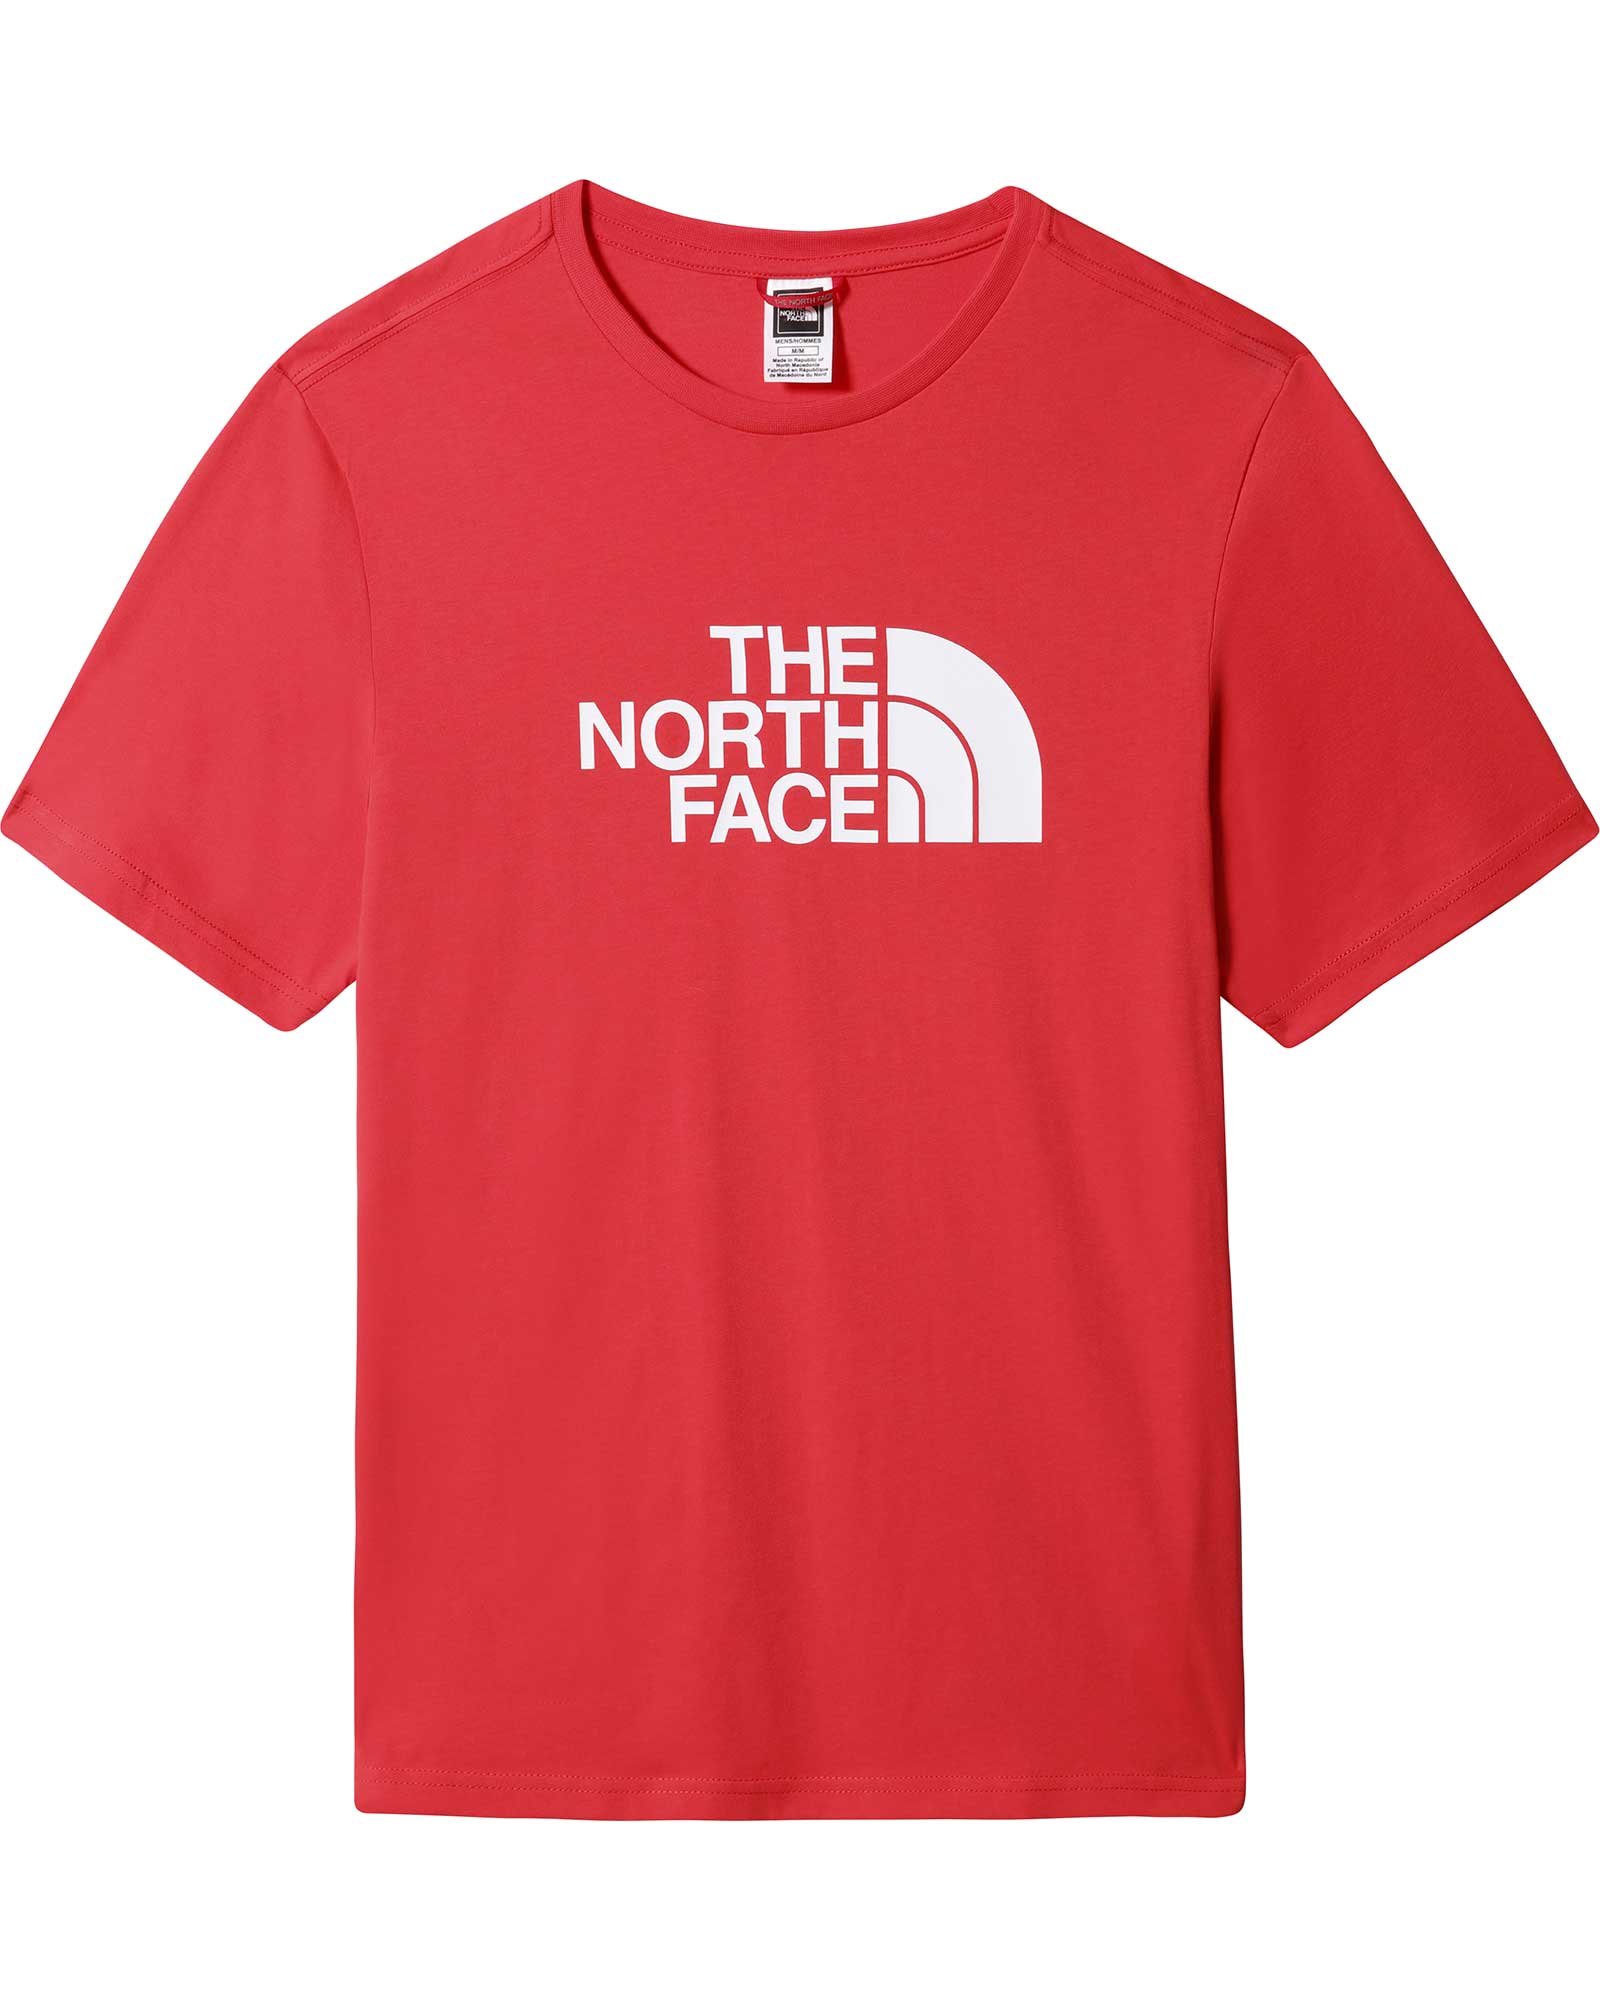 The North Face Easy Men’s T Shirt - Horizon Red S